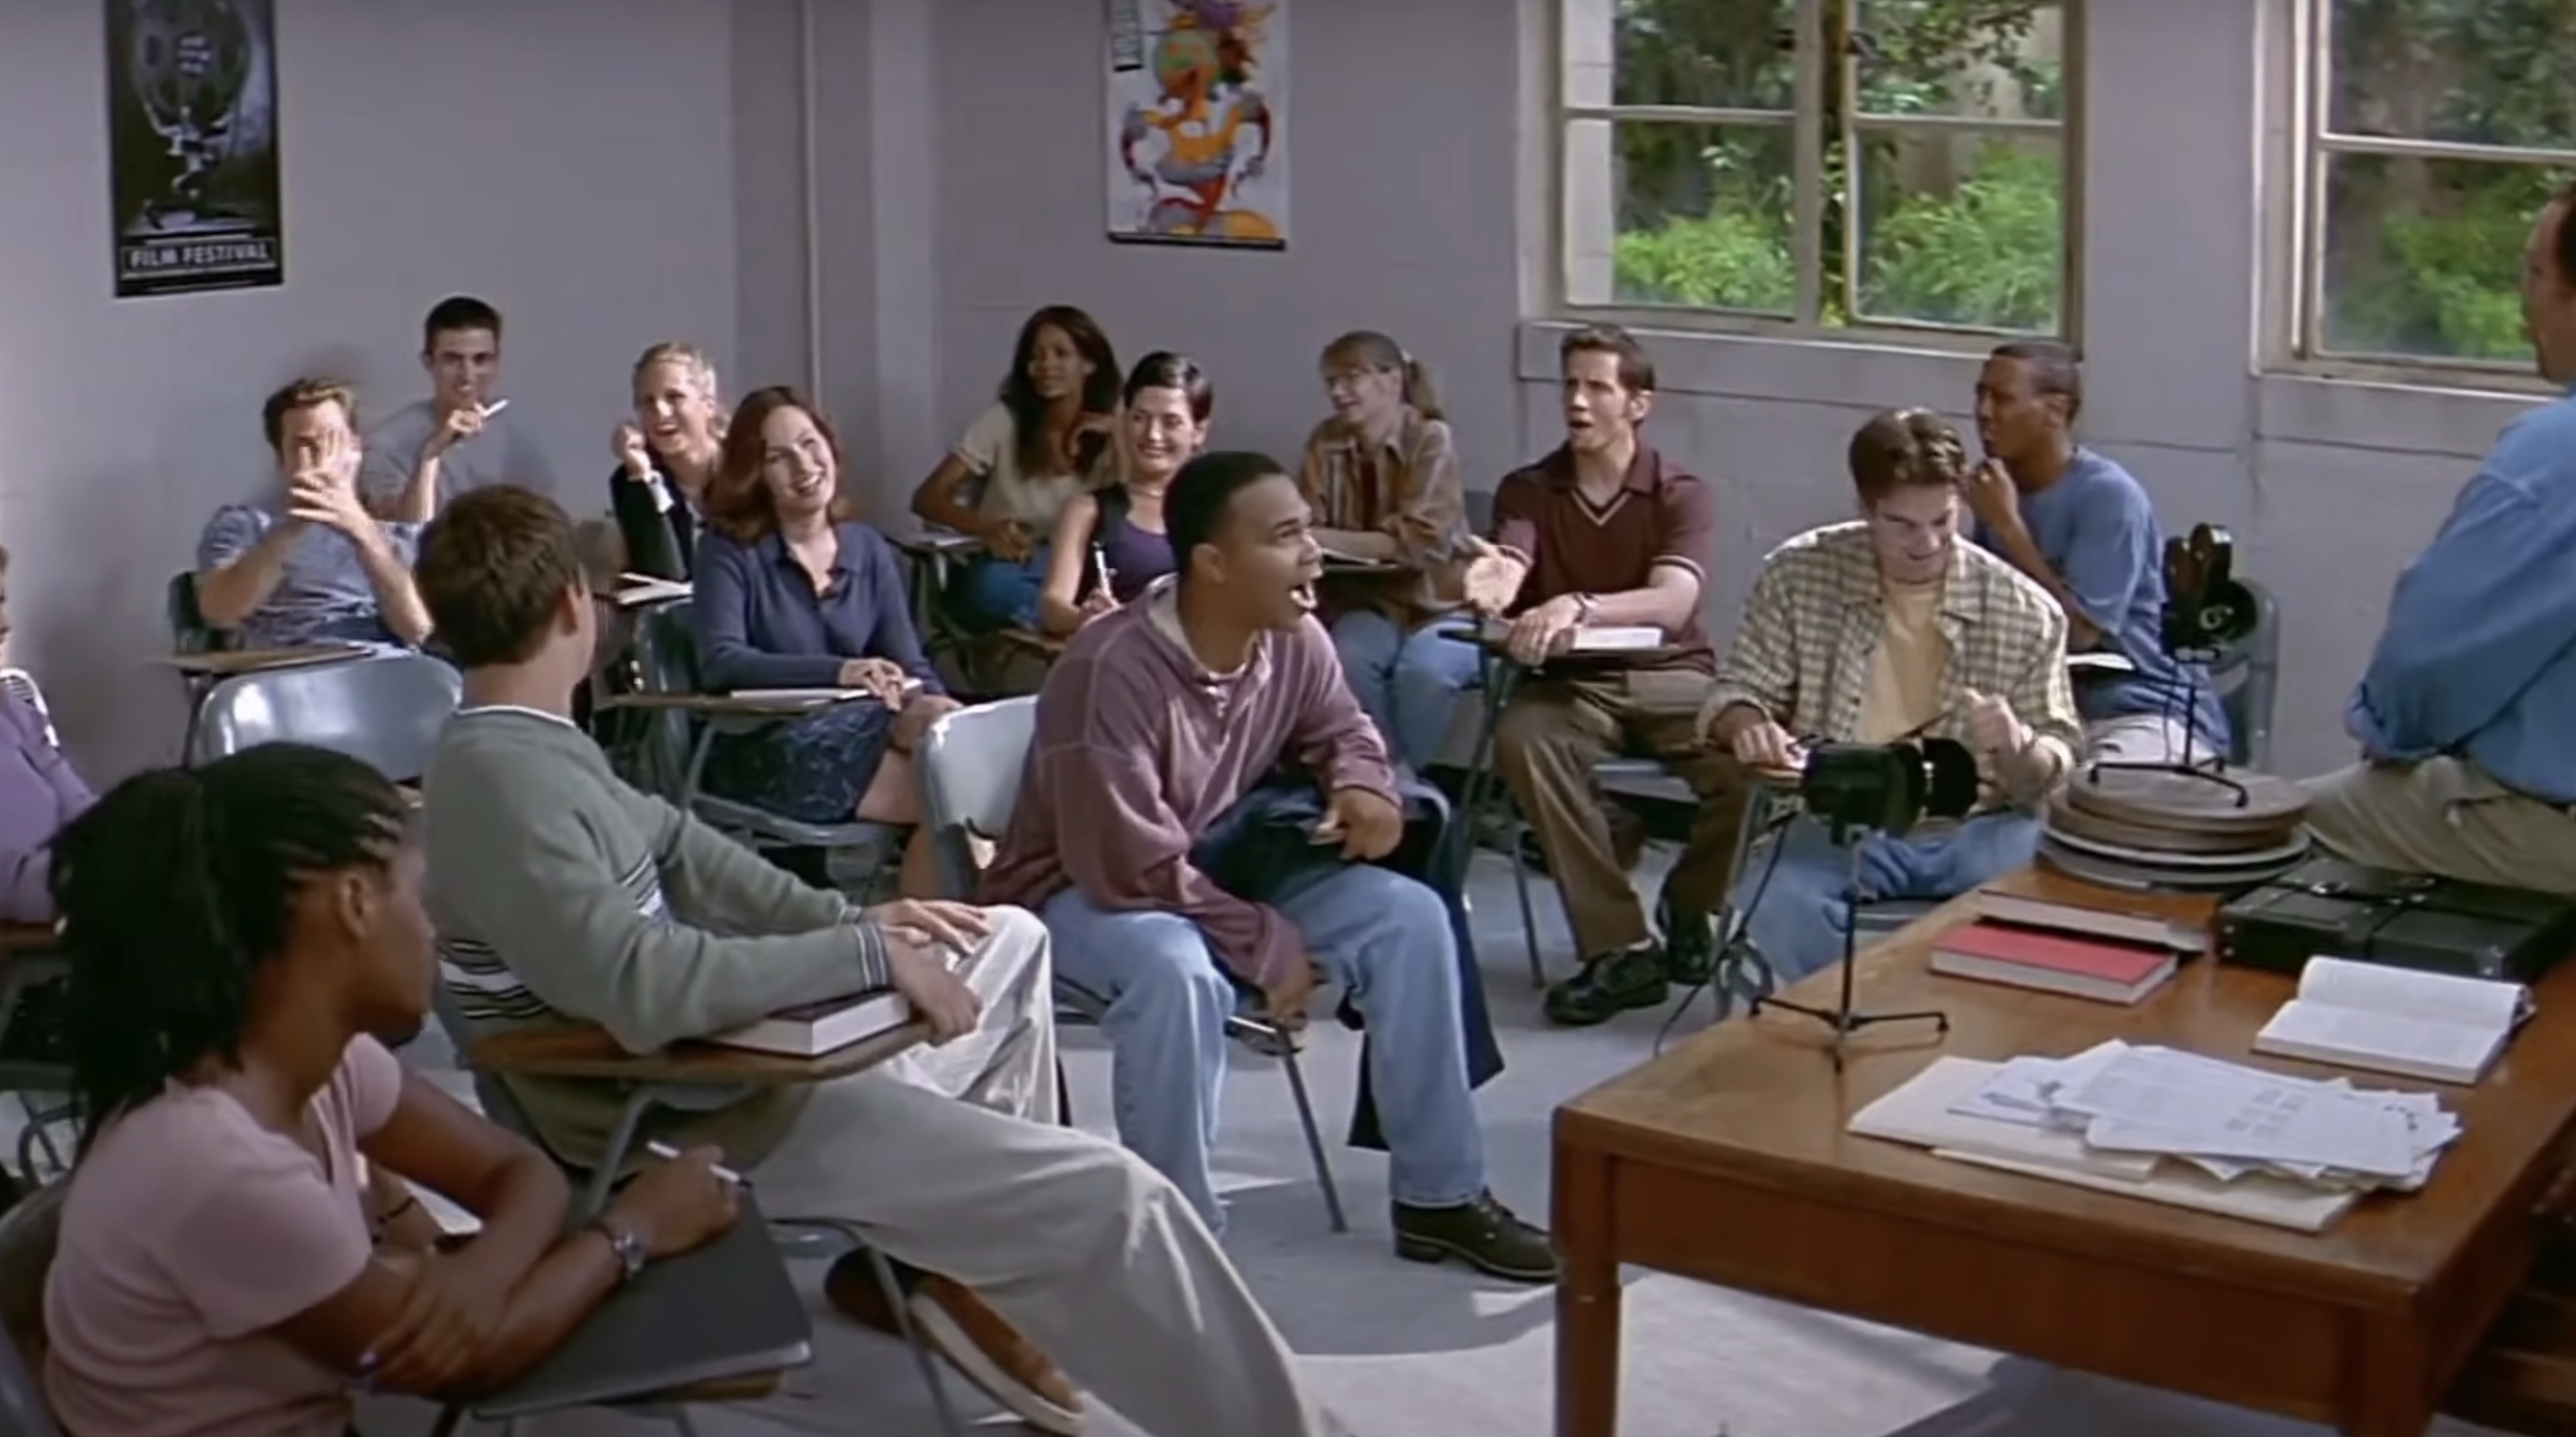 A classroom scene with students sitting at desks, focusing attentively on a person standing at the front